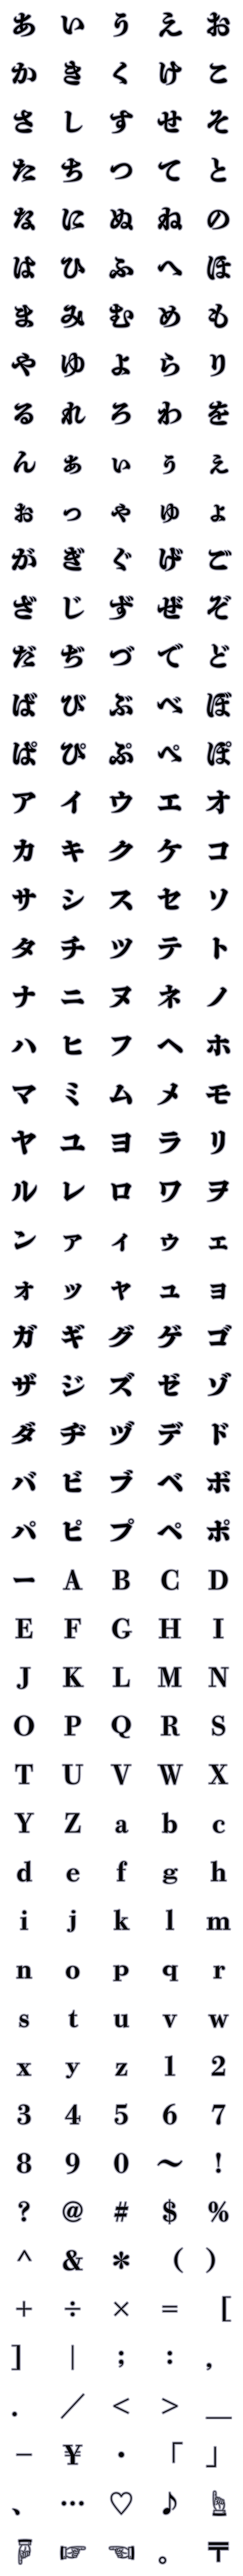 [LINE絵文字]秀英体でデコ文字「秀英四号太かな」の画像一覧